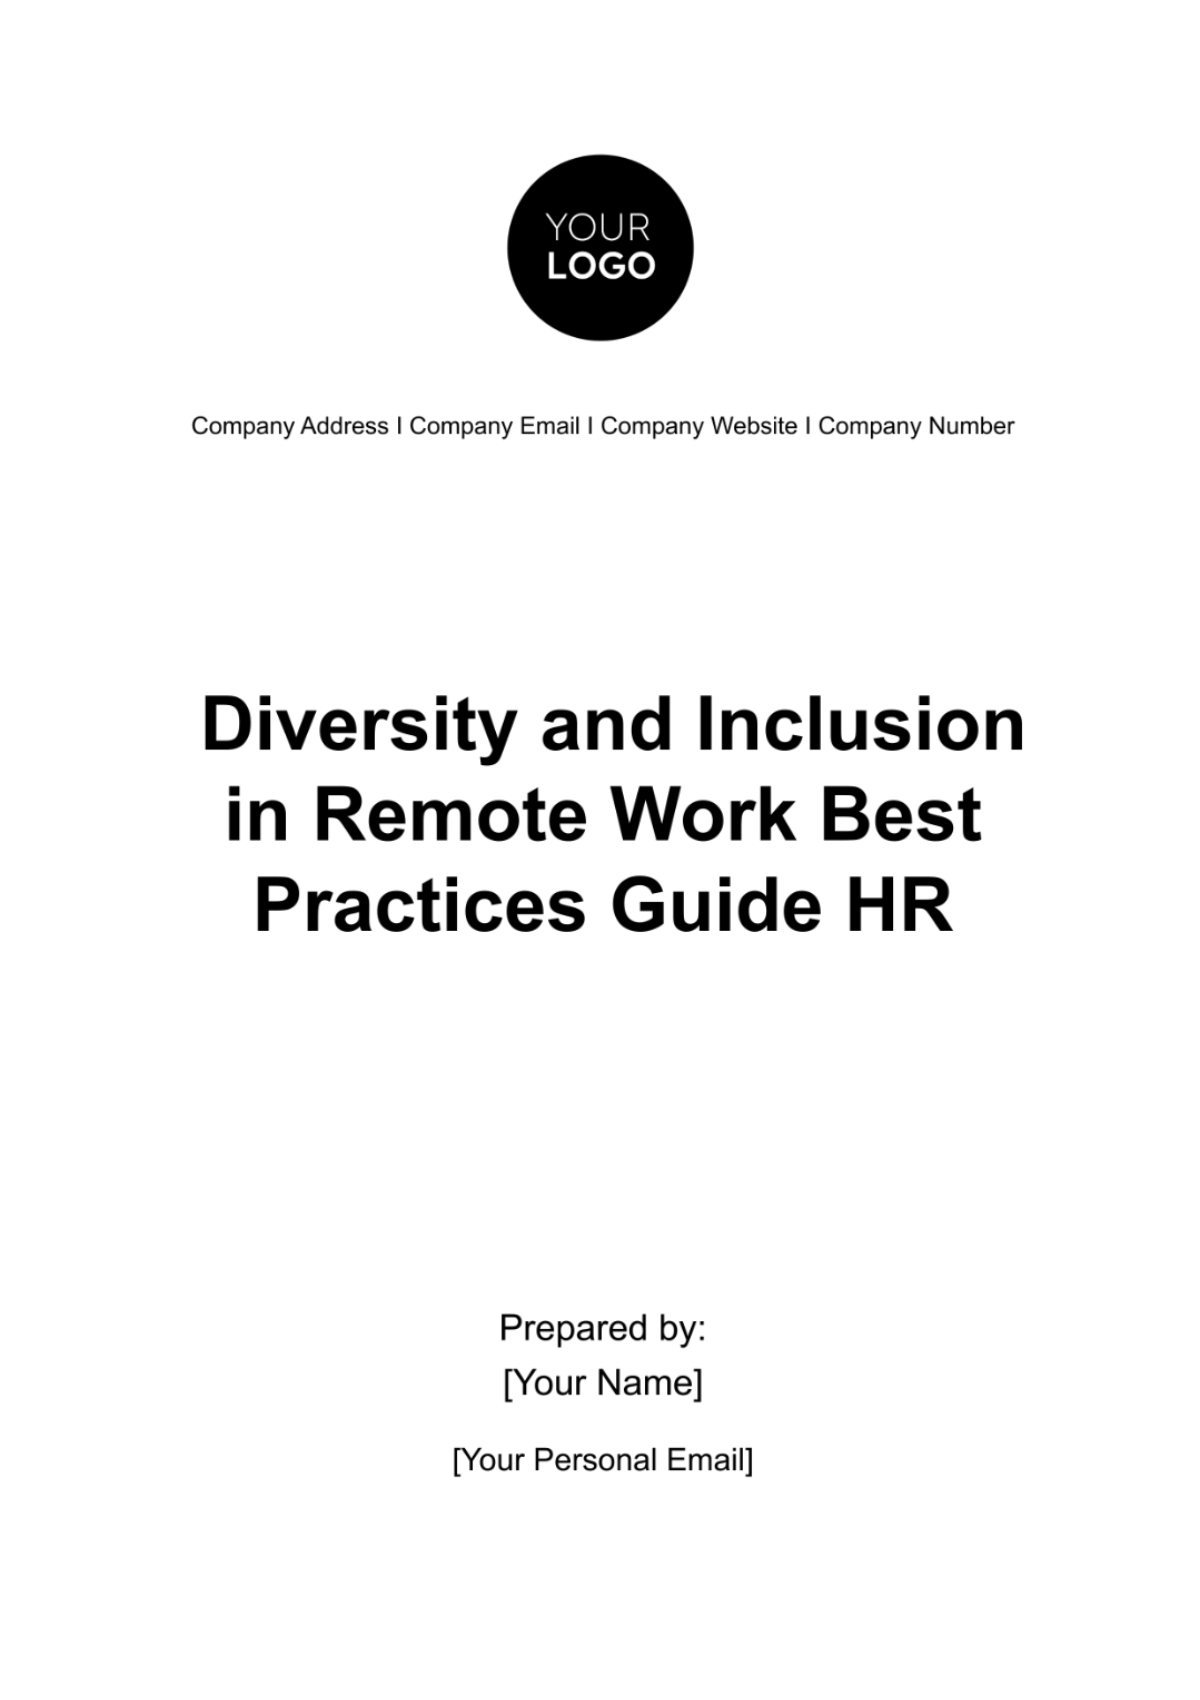 Free Diversity and Inclusion in Remote Work Best Practices Guide HR Template